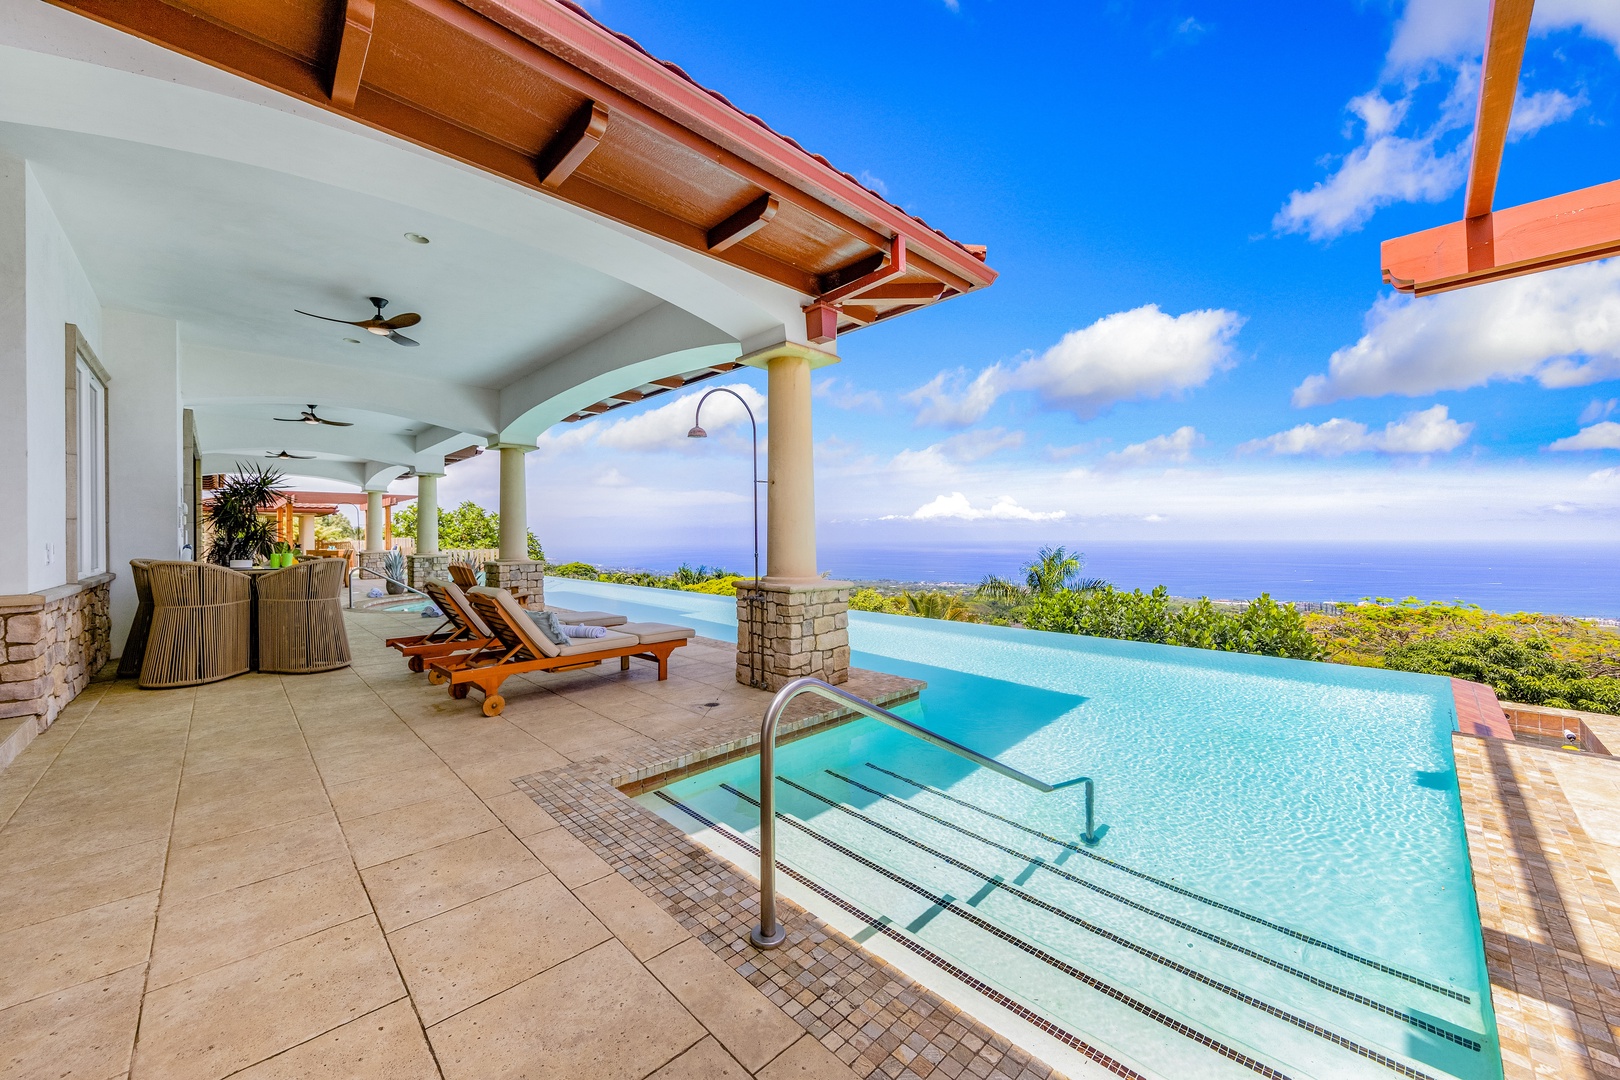 Kailua Kona Vacation Rentals, Kailua Kona Estate** - Unparalleled views right in front of you as you take a dip into the pool.